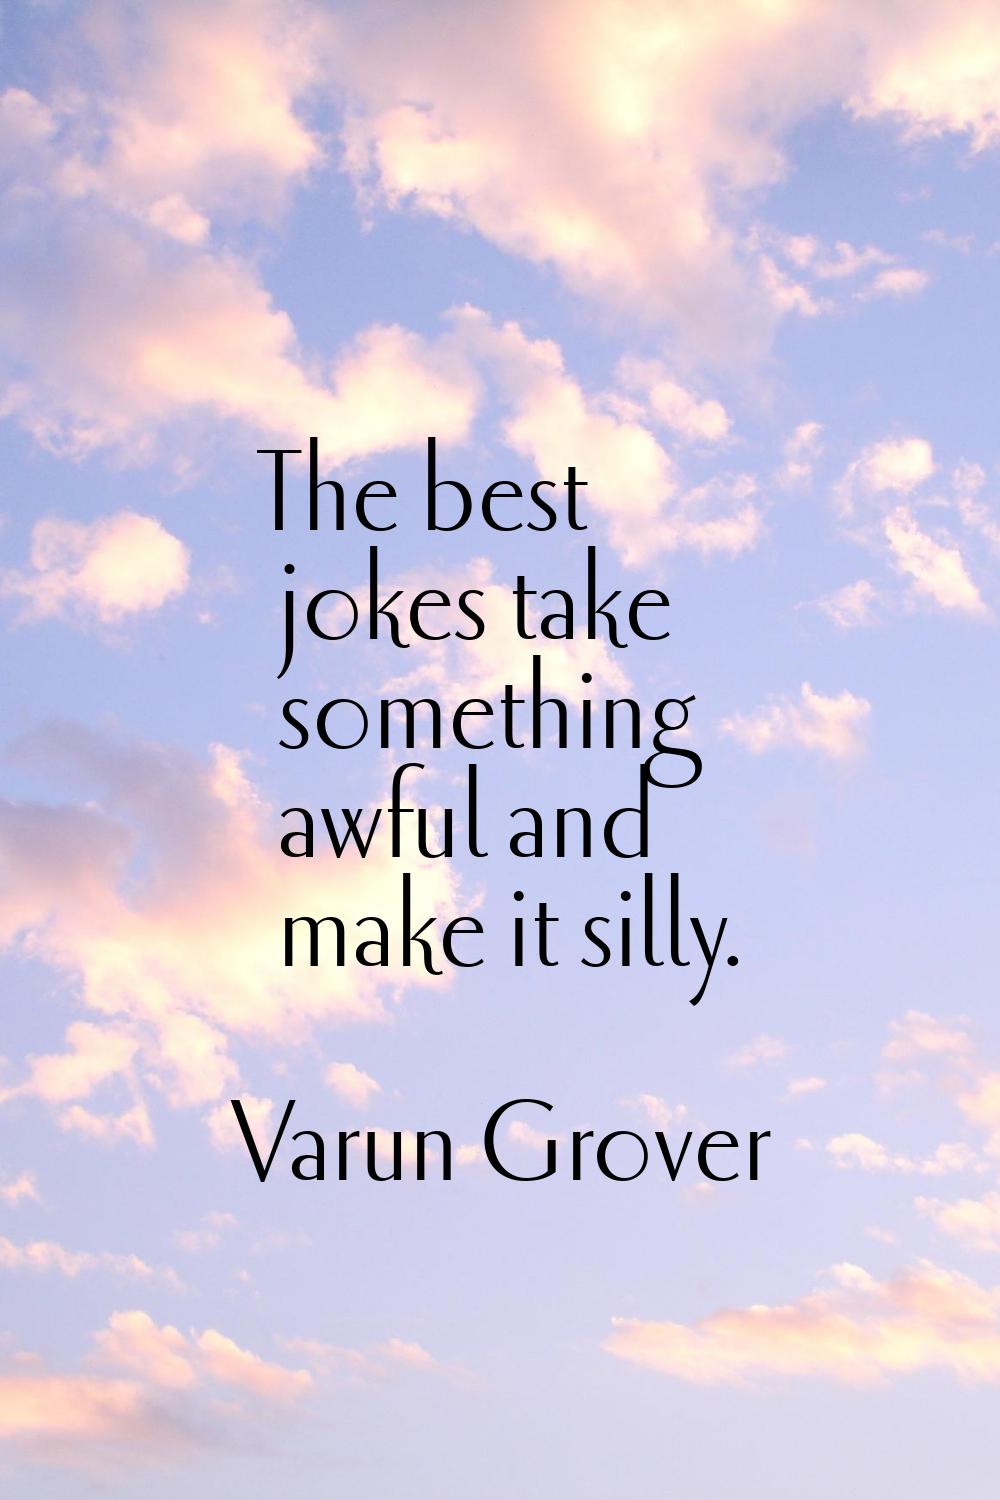 The best jokes take something awful and make it silly.